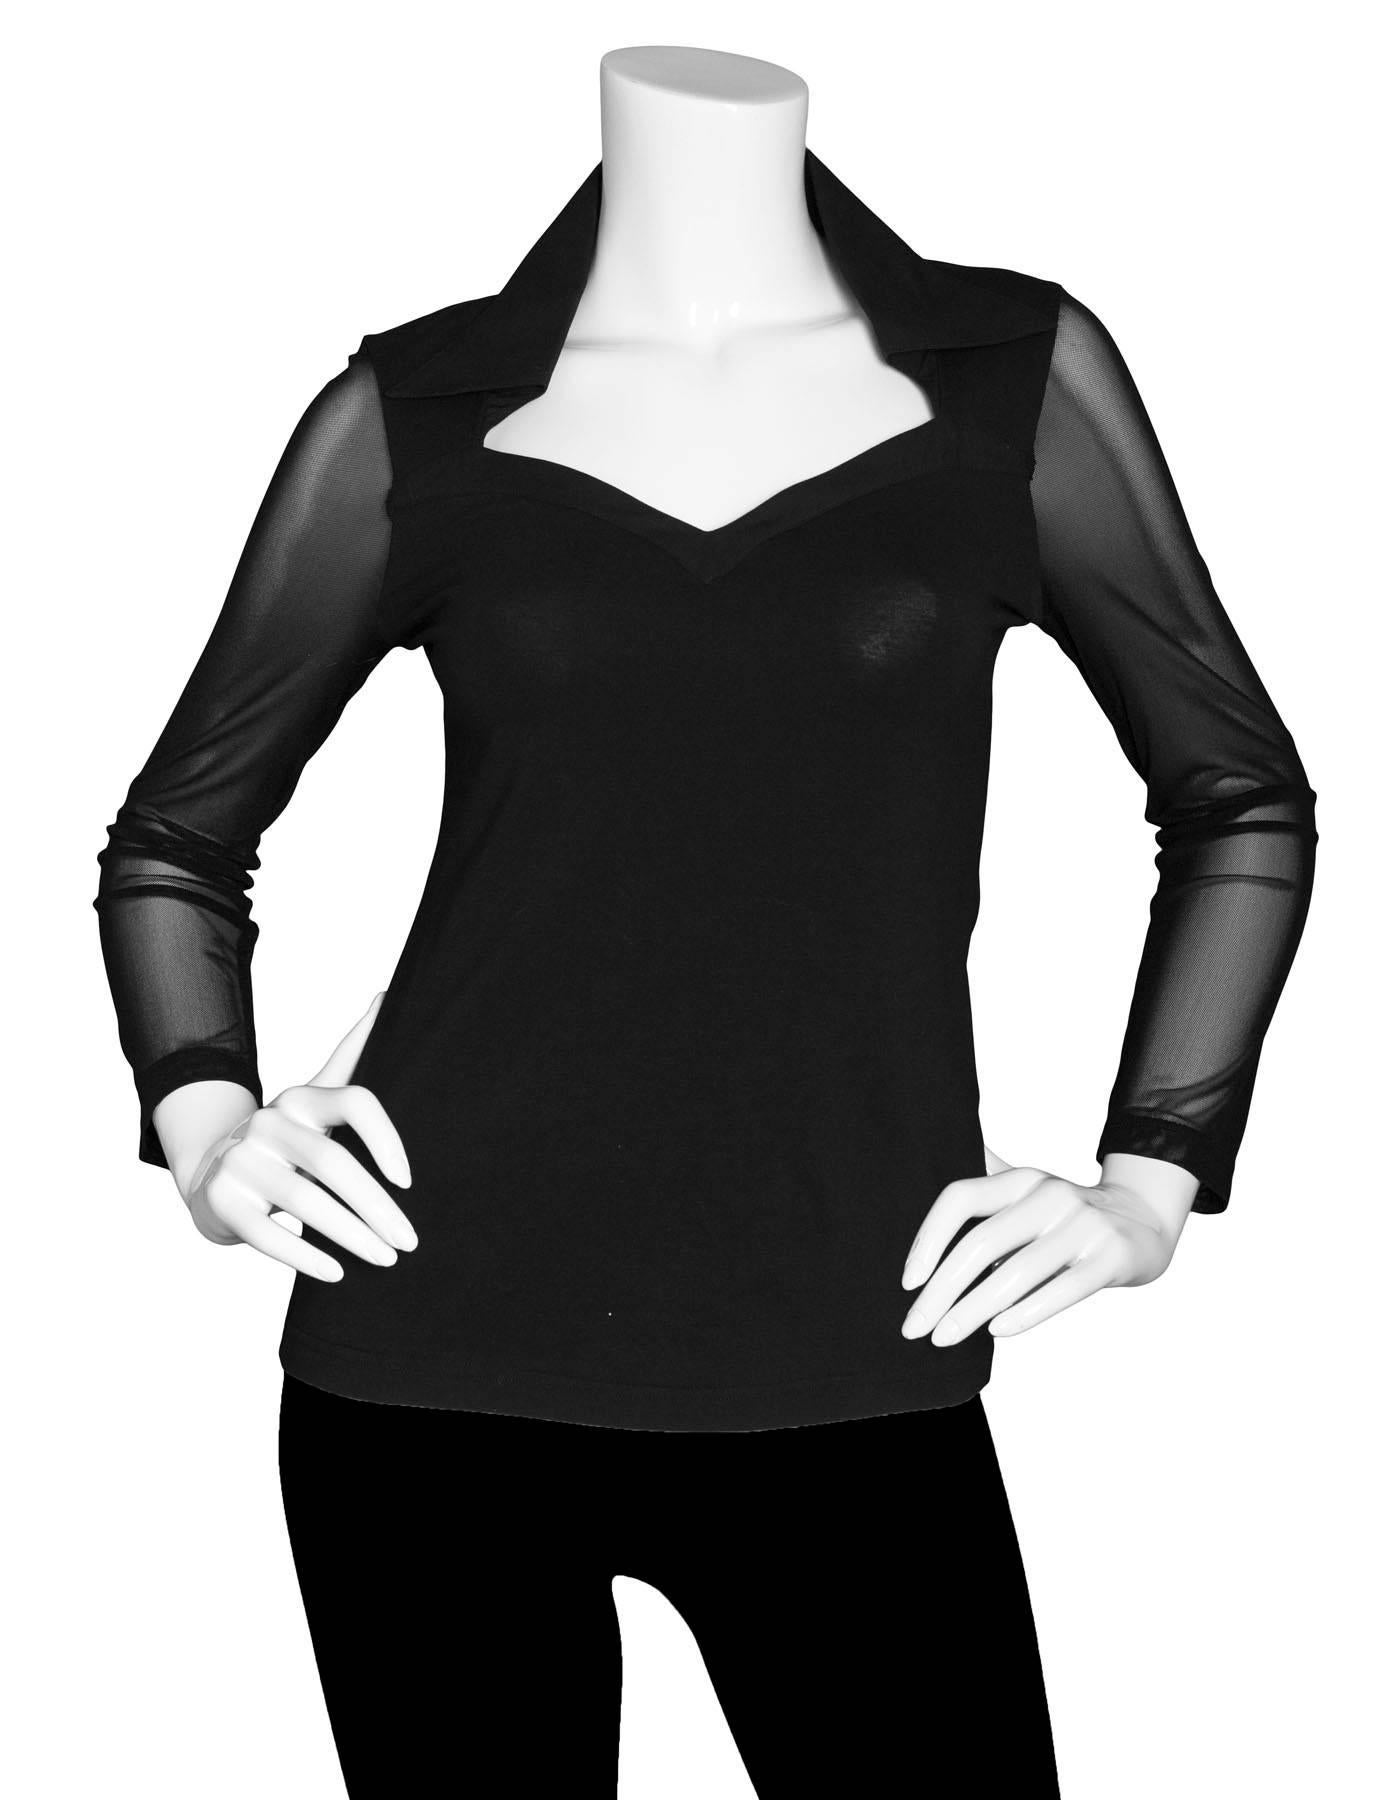 Anne Fontaine Black Sheer Longsleeve Top Sz FR38

Fetures sweetheart neckline and mesh sleeves

Made In: France
Color: Black
Composition: 93% Pima cotton, 7% Elastane
Lining: None
Closure/Opening: Pull over 
Overall Condition: Excellent pre-owned